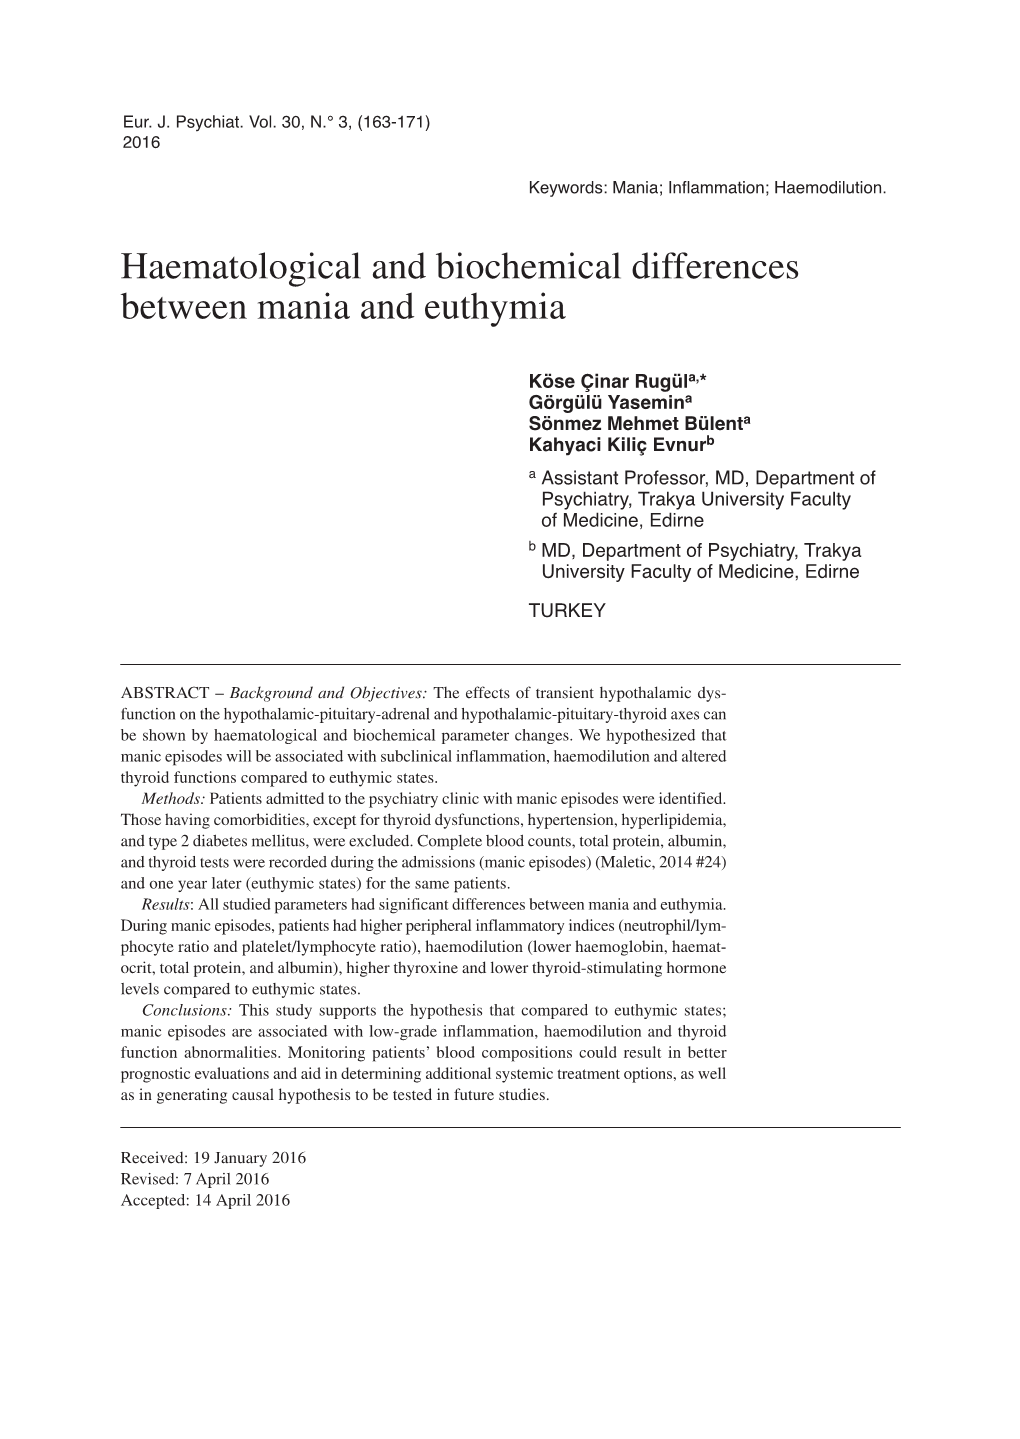 Haematological and Biochemical Differences Between Mania and Euthymia